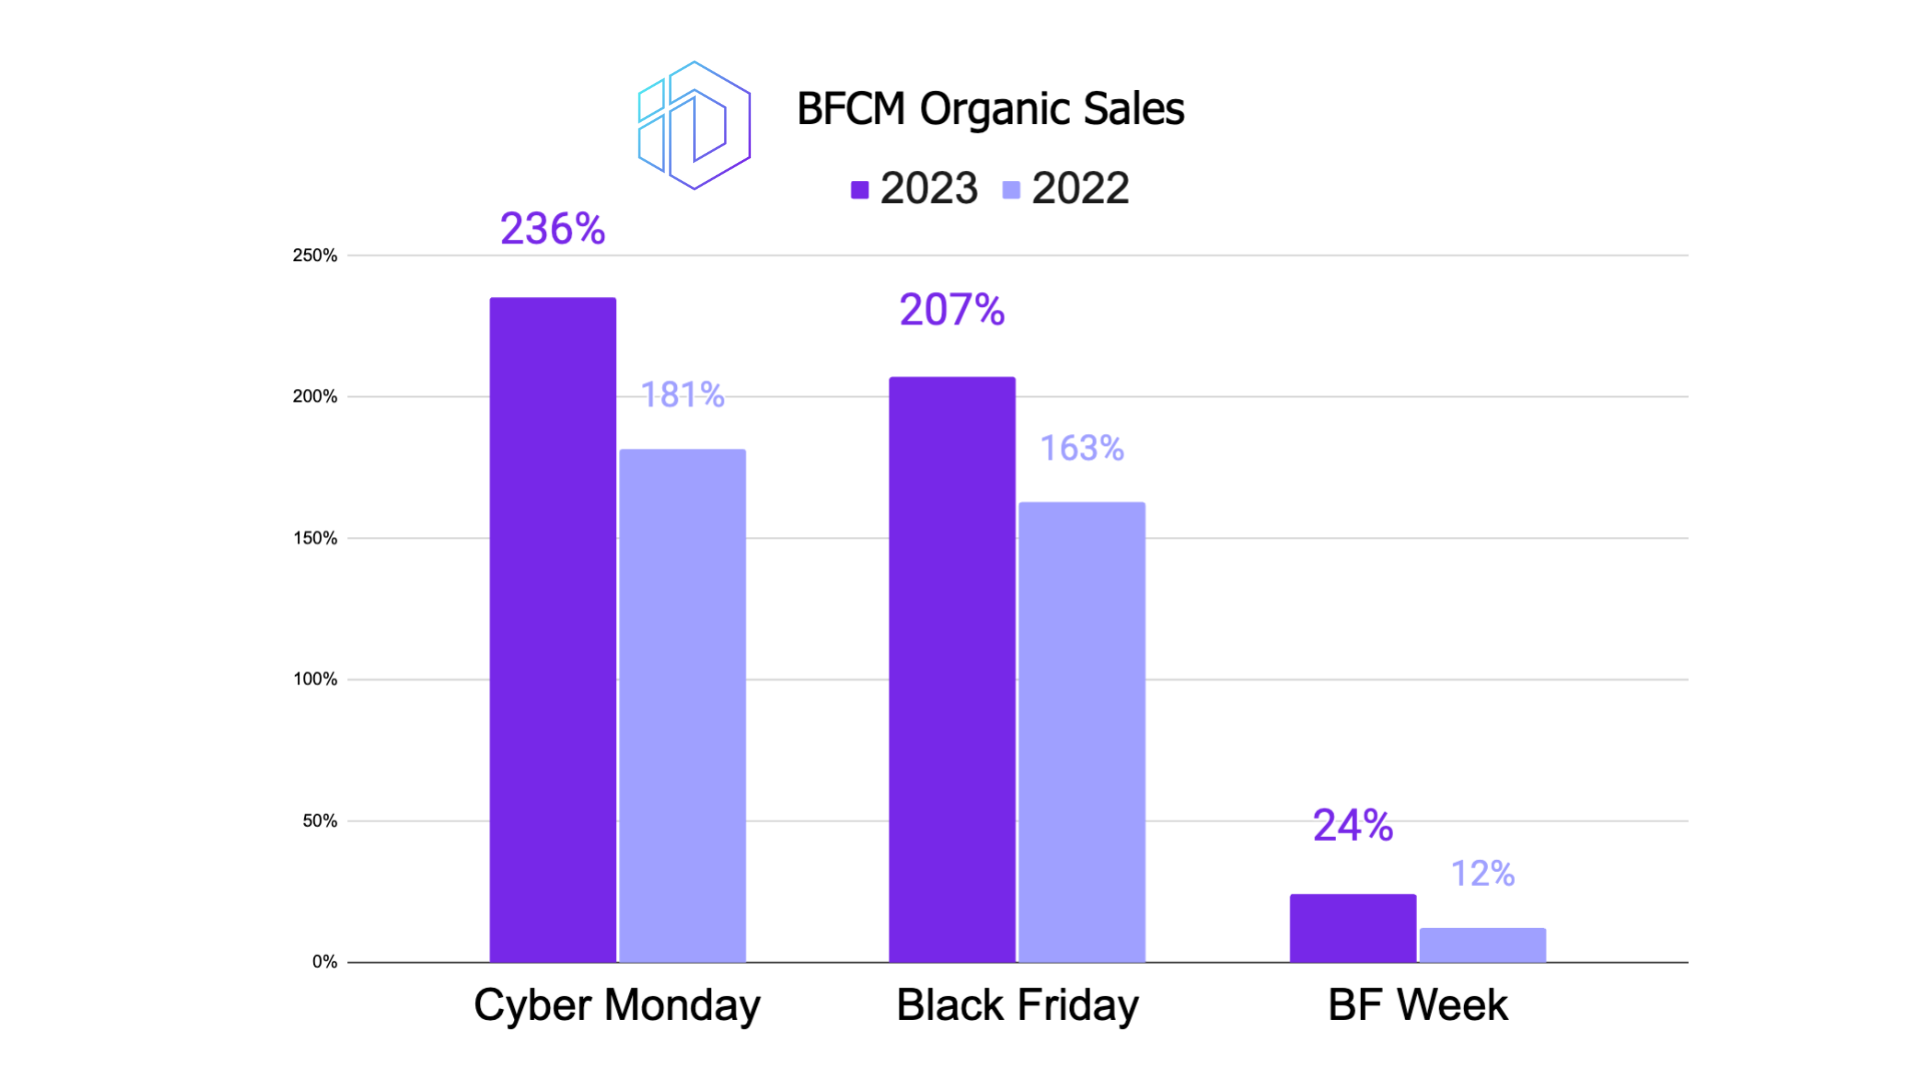 Bar chart displaying Organic Sales growth percentages for Cyber Monday, Black Friday, BF Week, and Average 30-Day Pre BF Week, comparing 2022 and 2023. There's a significant growth in organic sales for Cyber Monday and Black Friday in 2023.